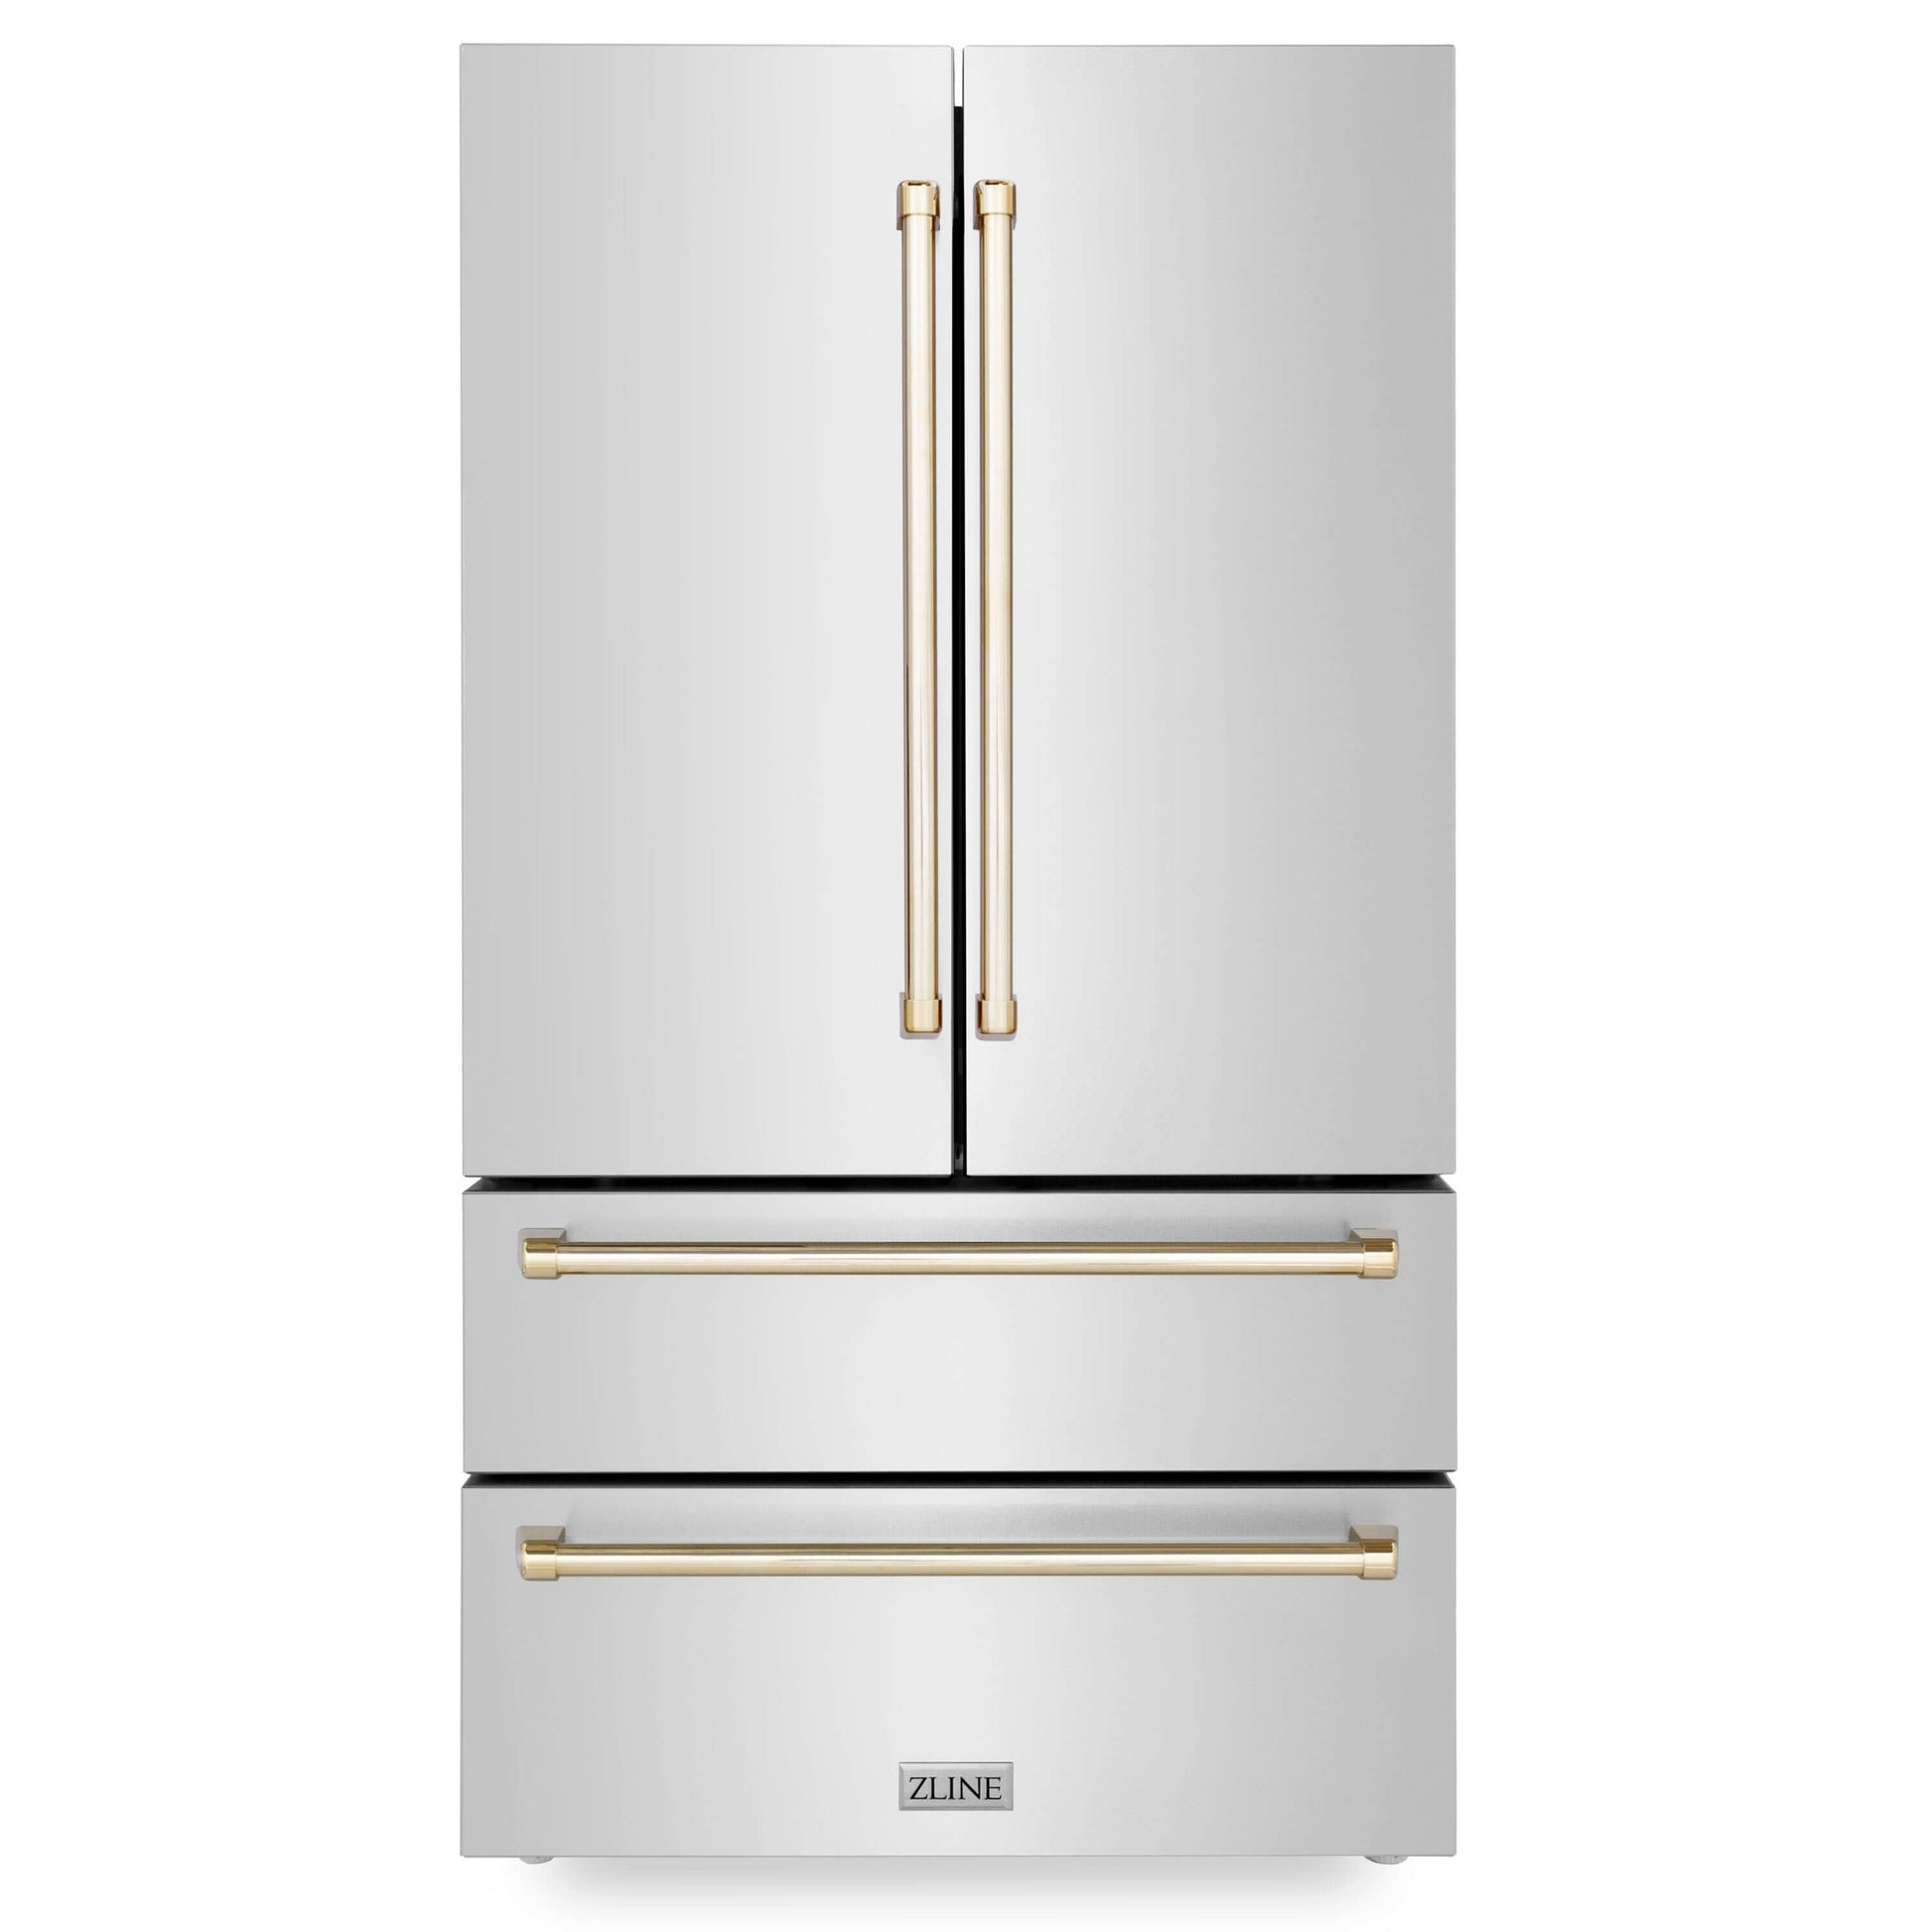 ZLINE Autograph Edition 36 in. 22.5 cu. ft Freestanding French Door Refrigerator with Ice Maker in Fingerprint Resistant Stainless Steel with Polished Gold Accents (RFMZ-36-G) front.